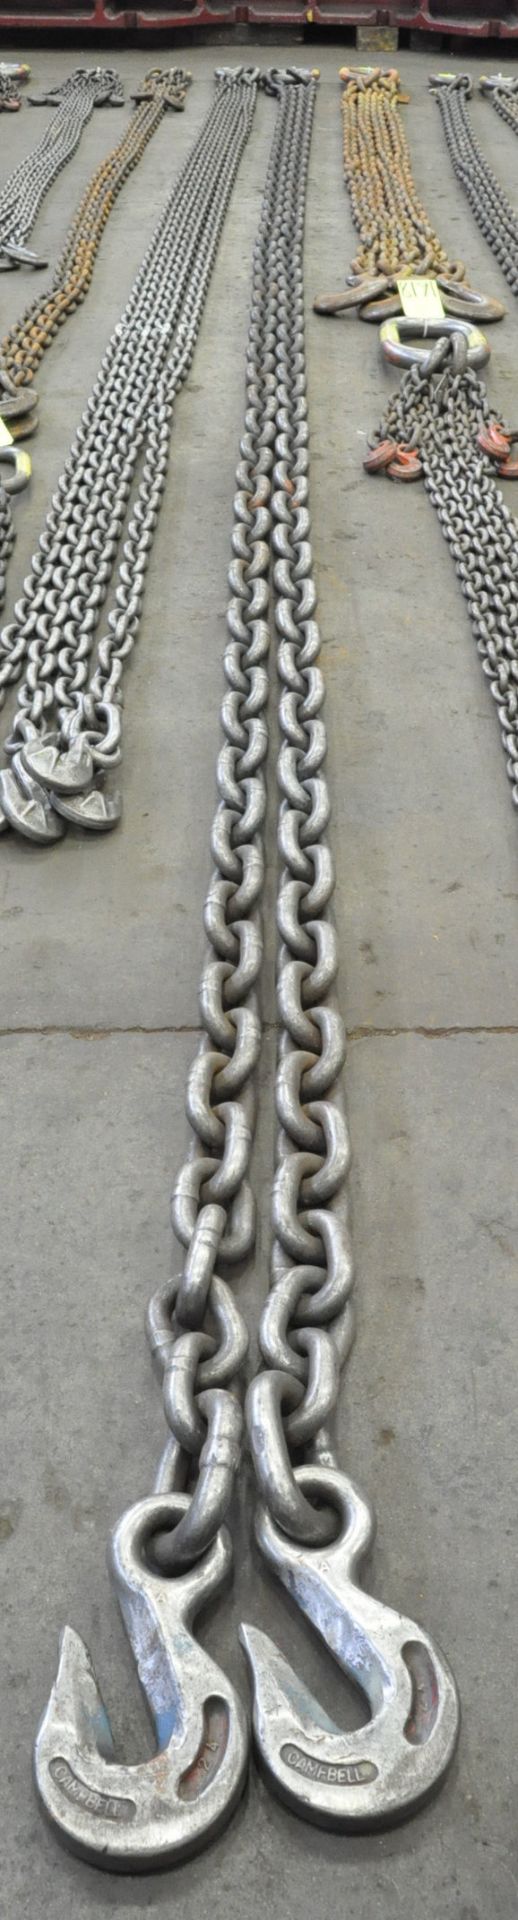 3/4" Link x 20' Long 2-Hook Chain Sling, Cert Tag, (G-23), (Yellow Tag) - Image 2 of 2